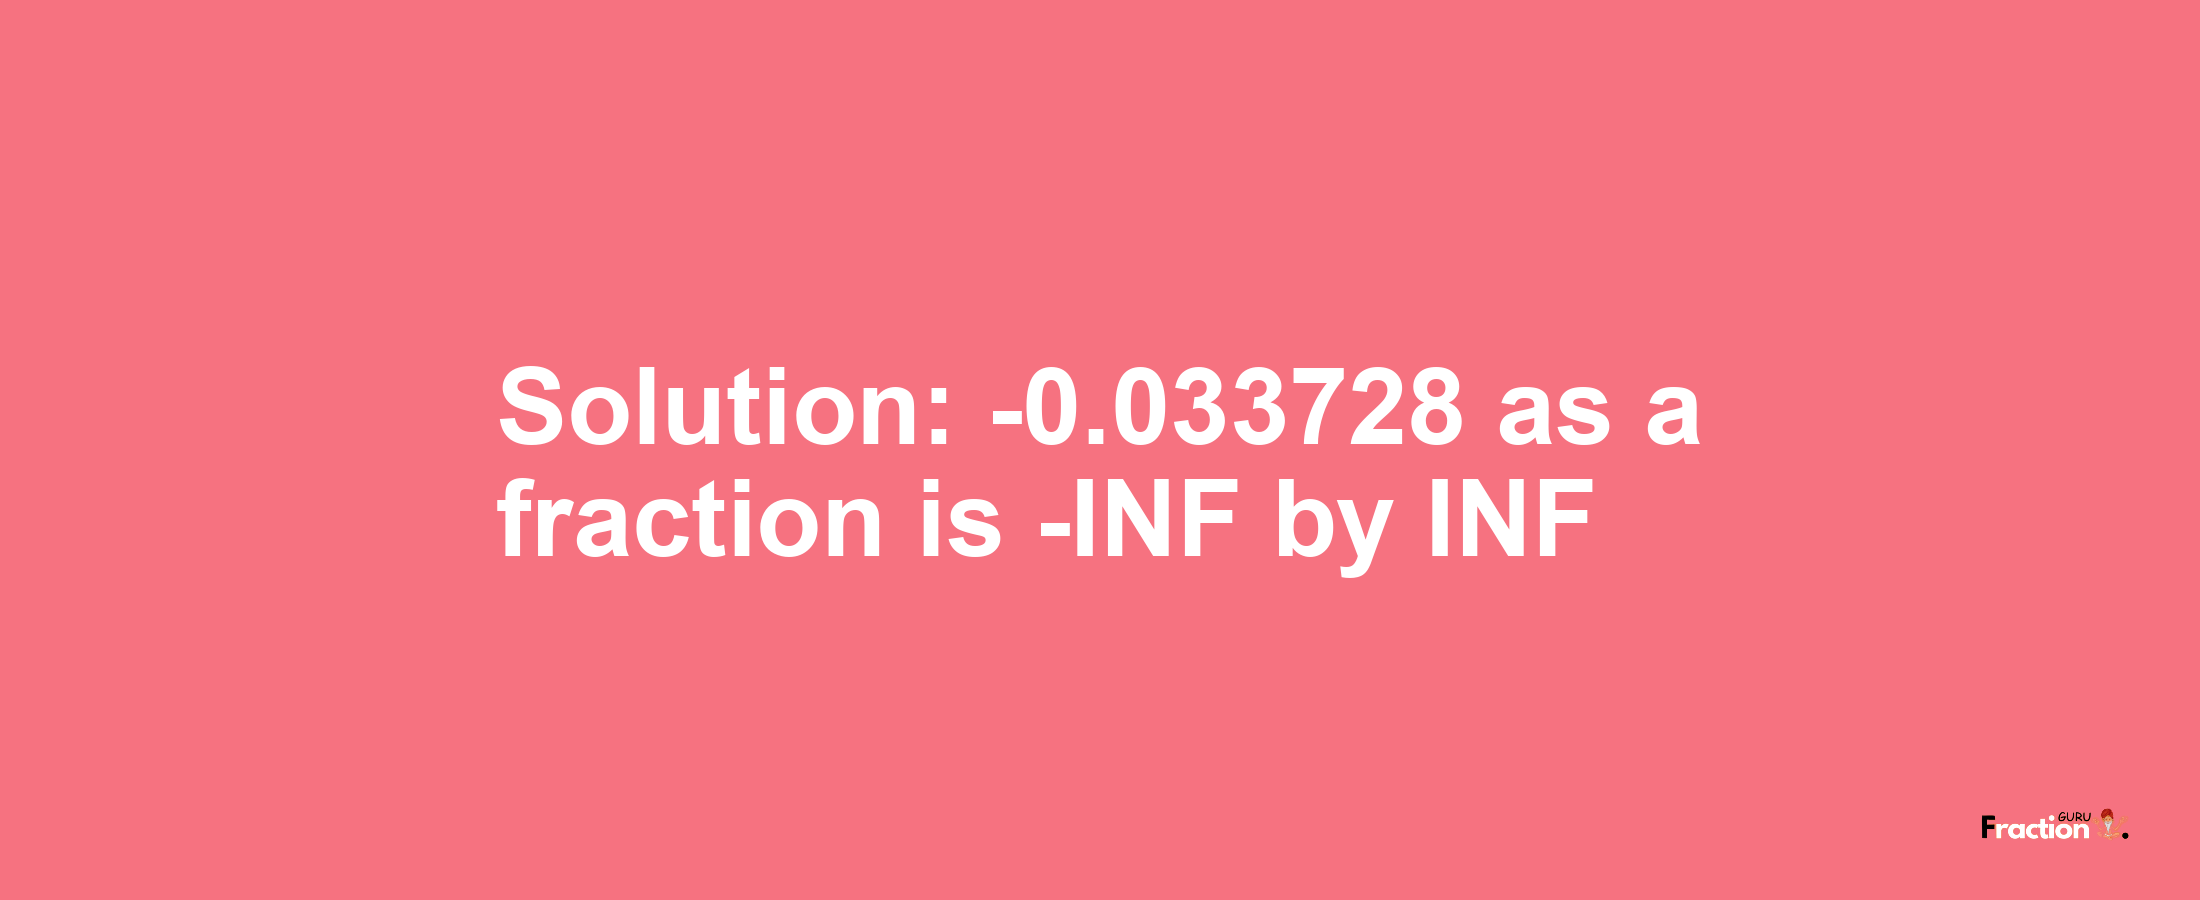 Solution:-0.033728 as a fraction is -INF/INF